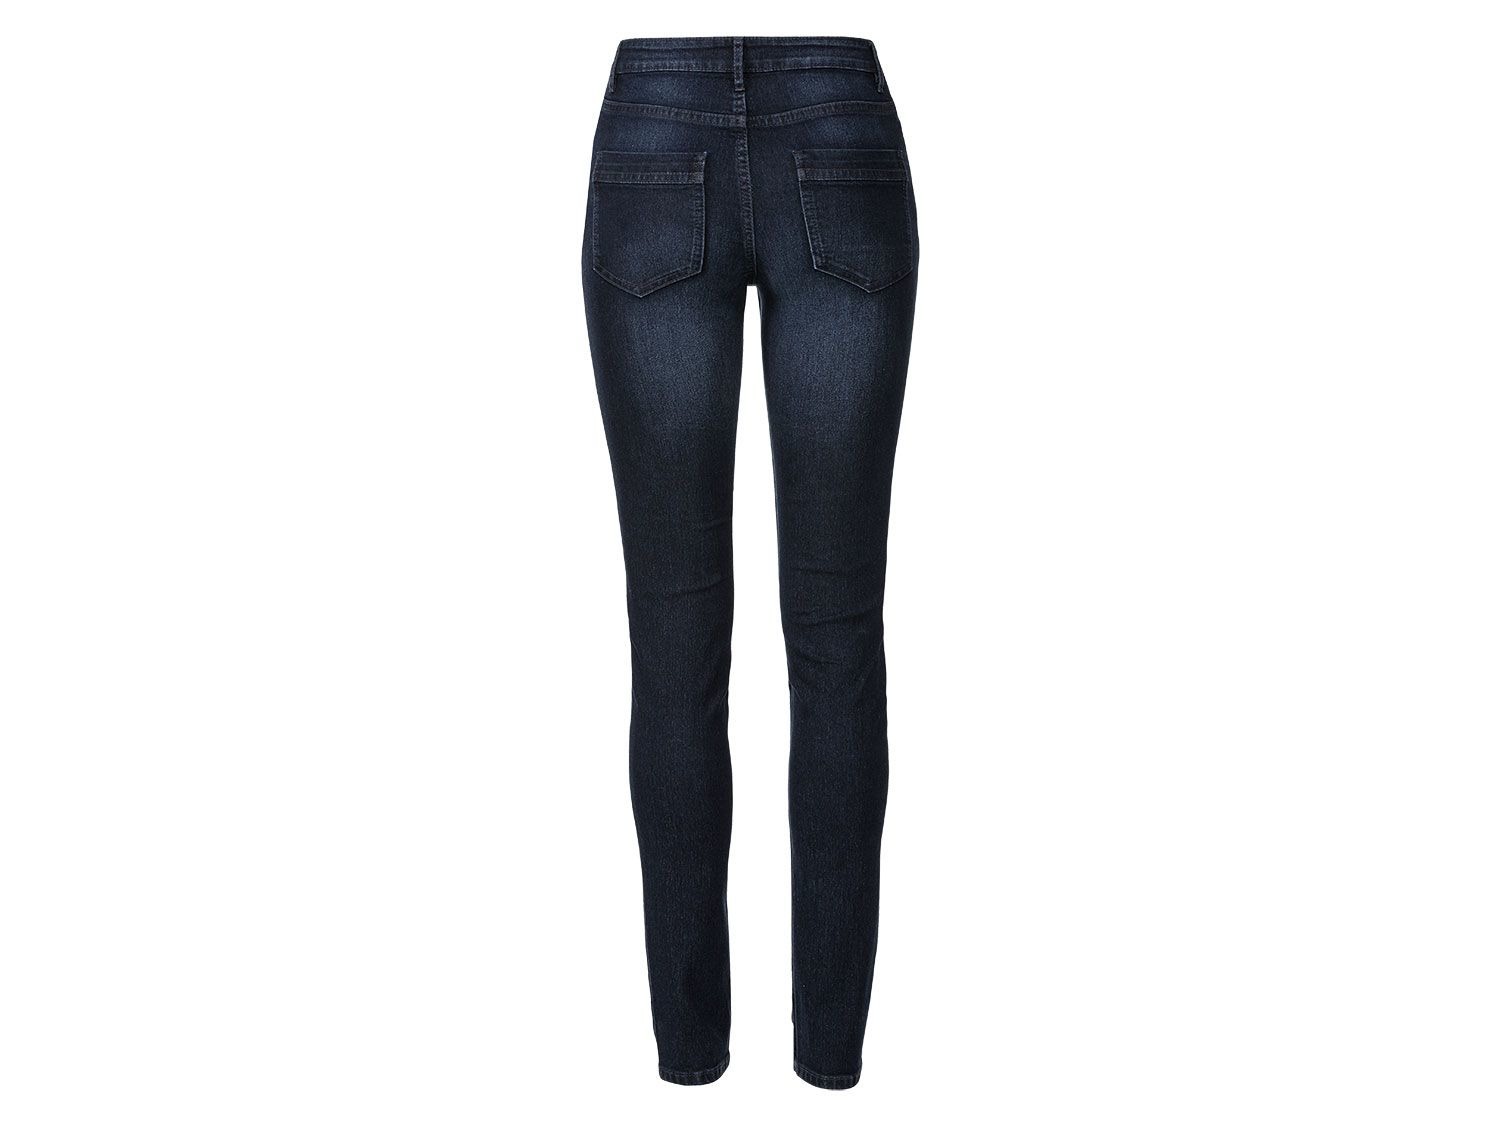 Premium Collection by ESMARA Femmes Stretch Jeans Jeans Pantalon Skinny Taille